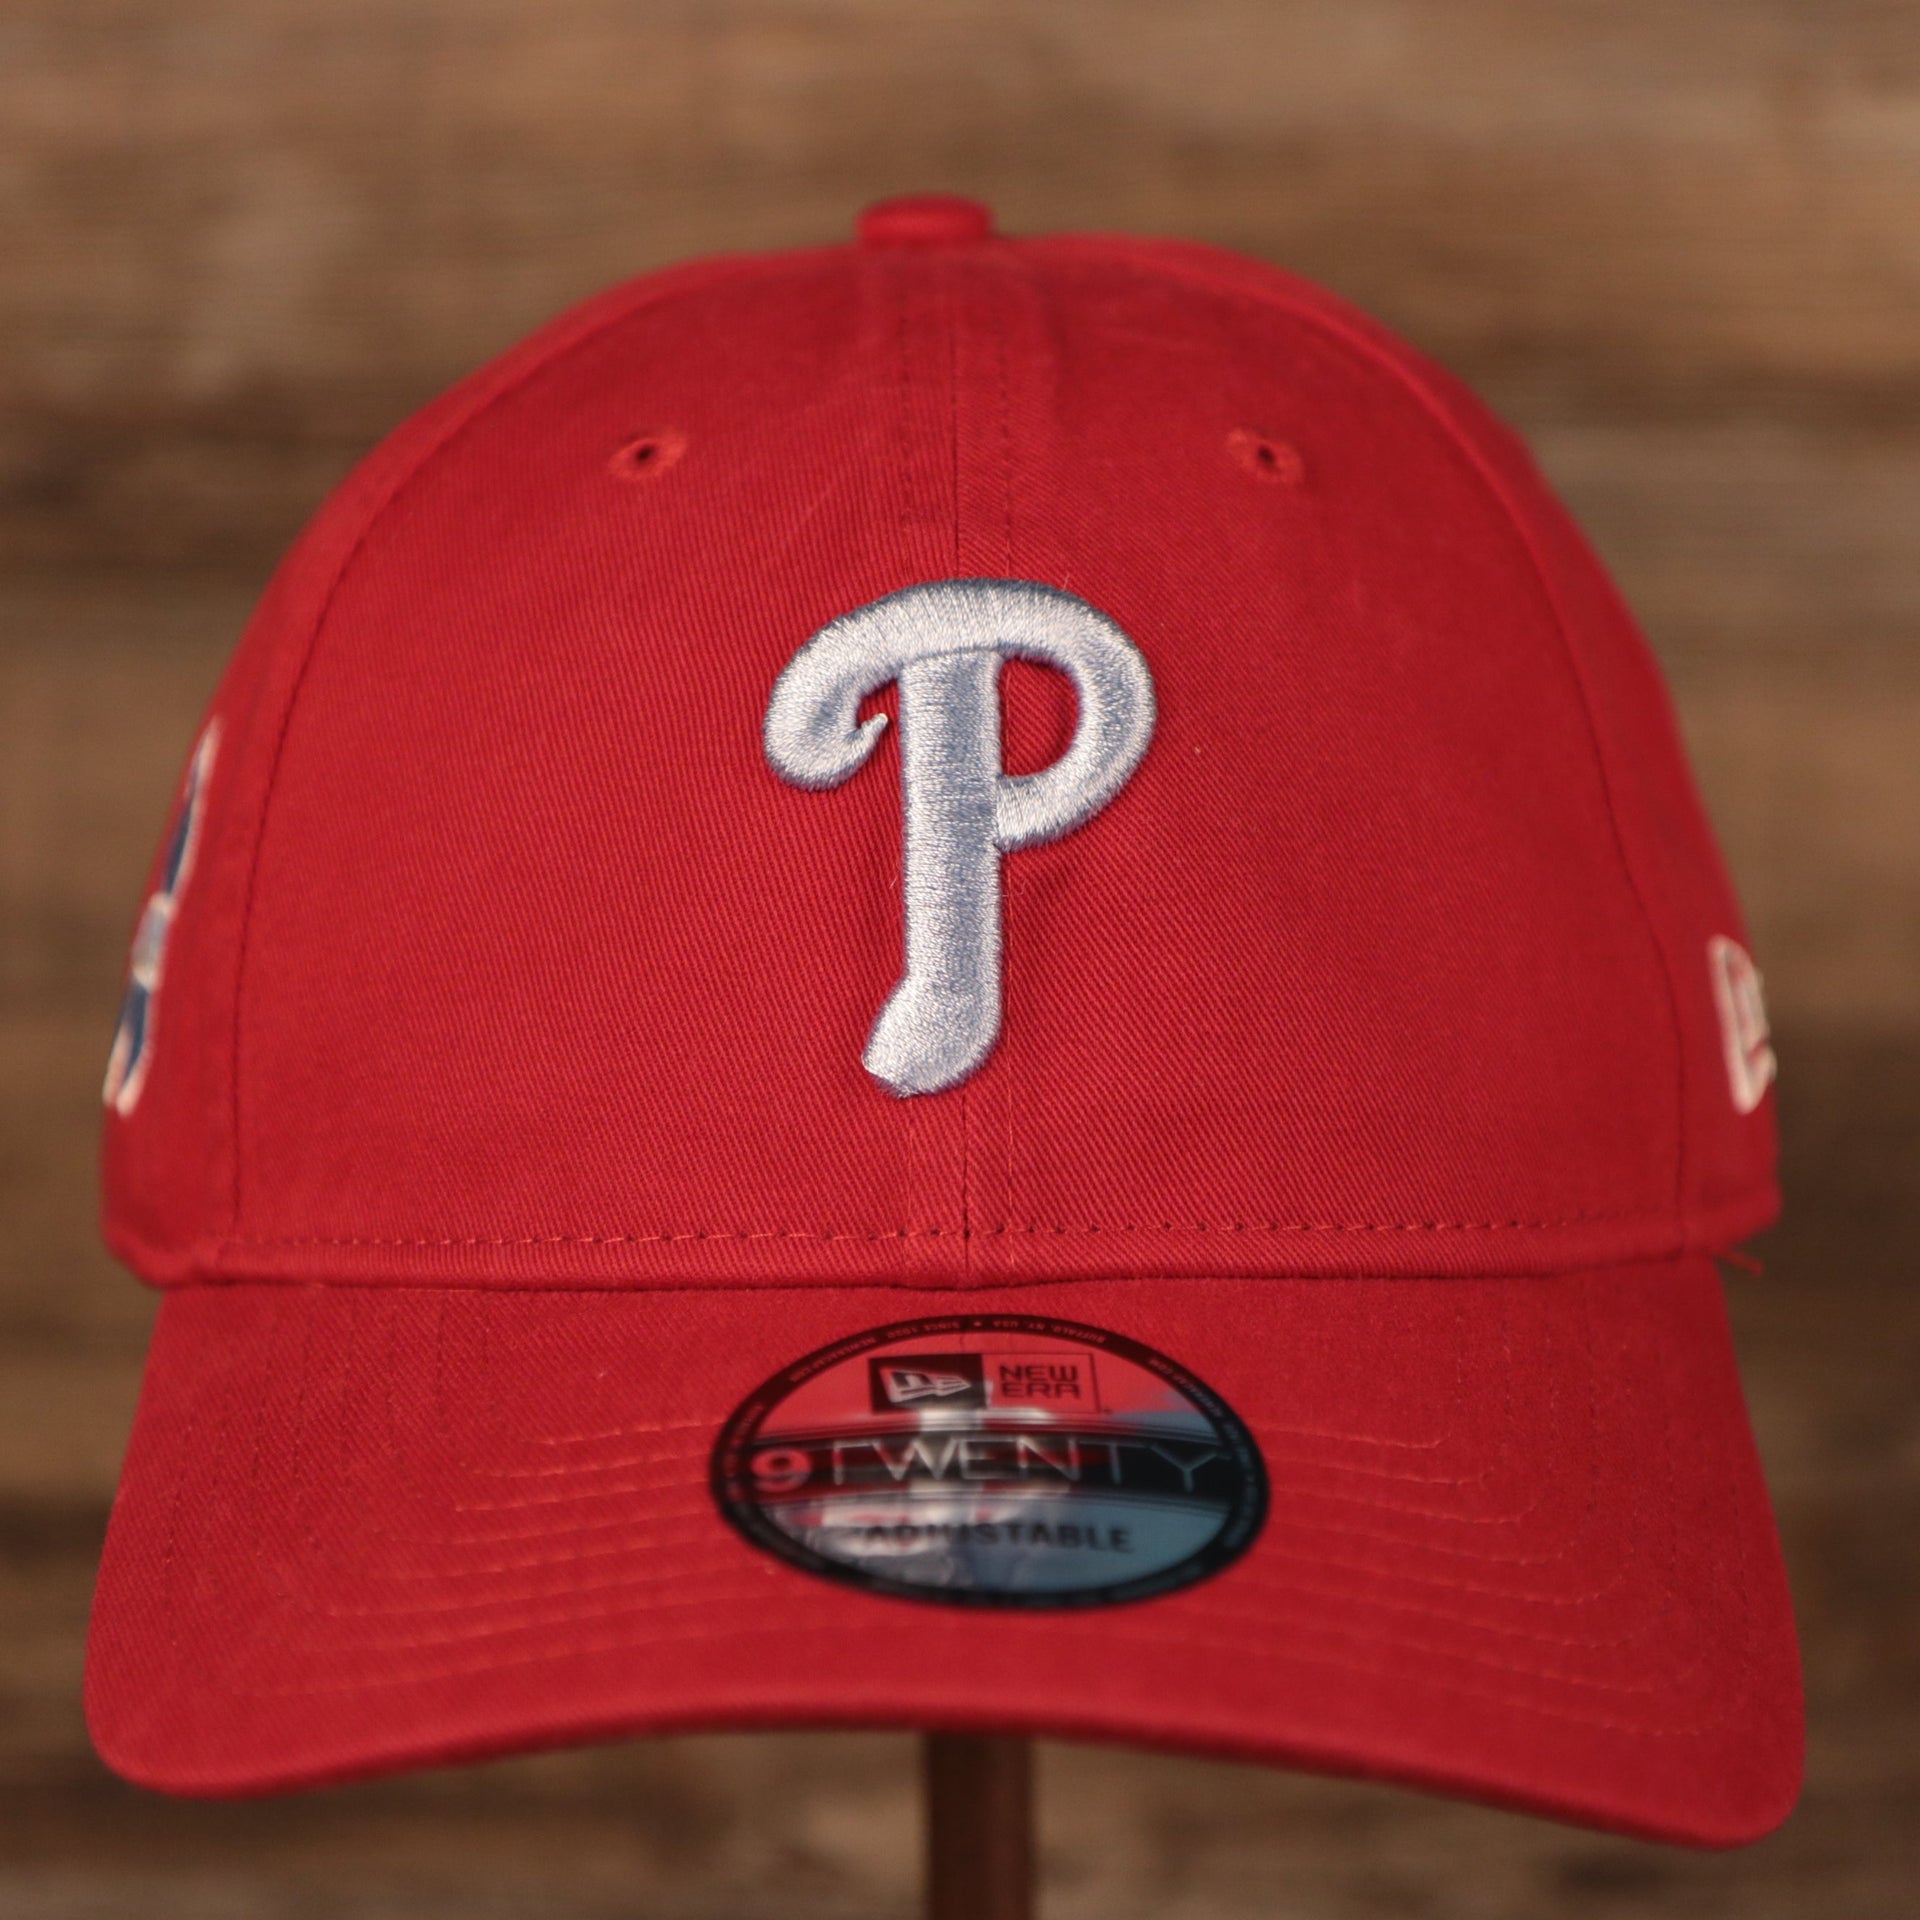 The front side of the red Philadelphia Phillies 920 dad hat for the 2021 fathers day by New Era.